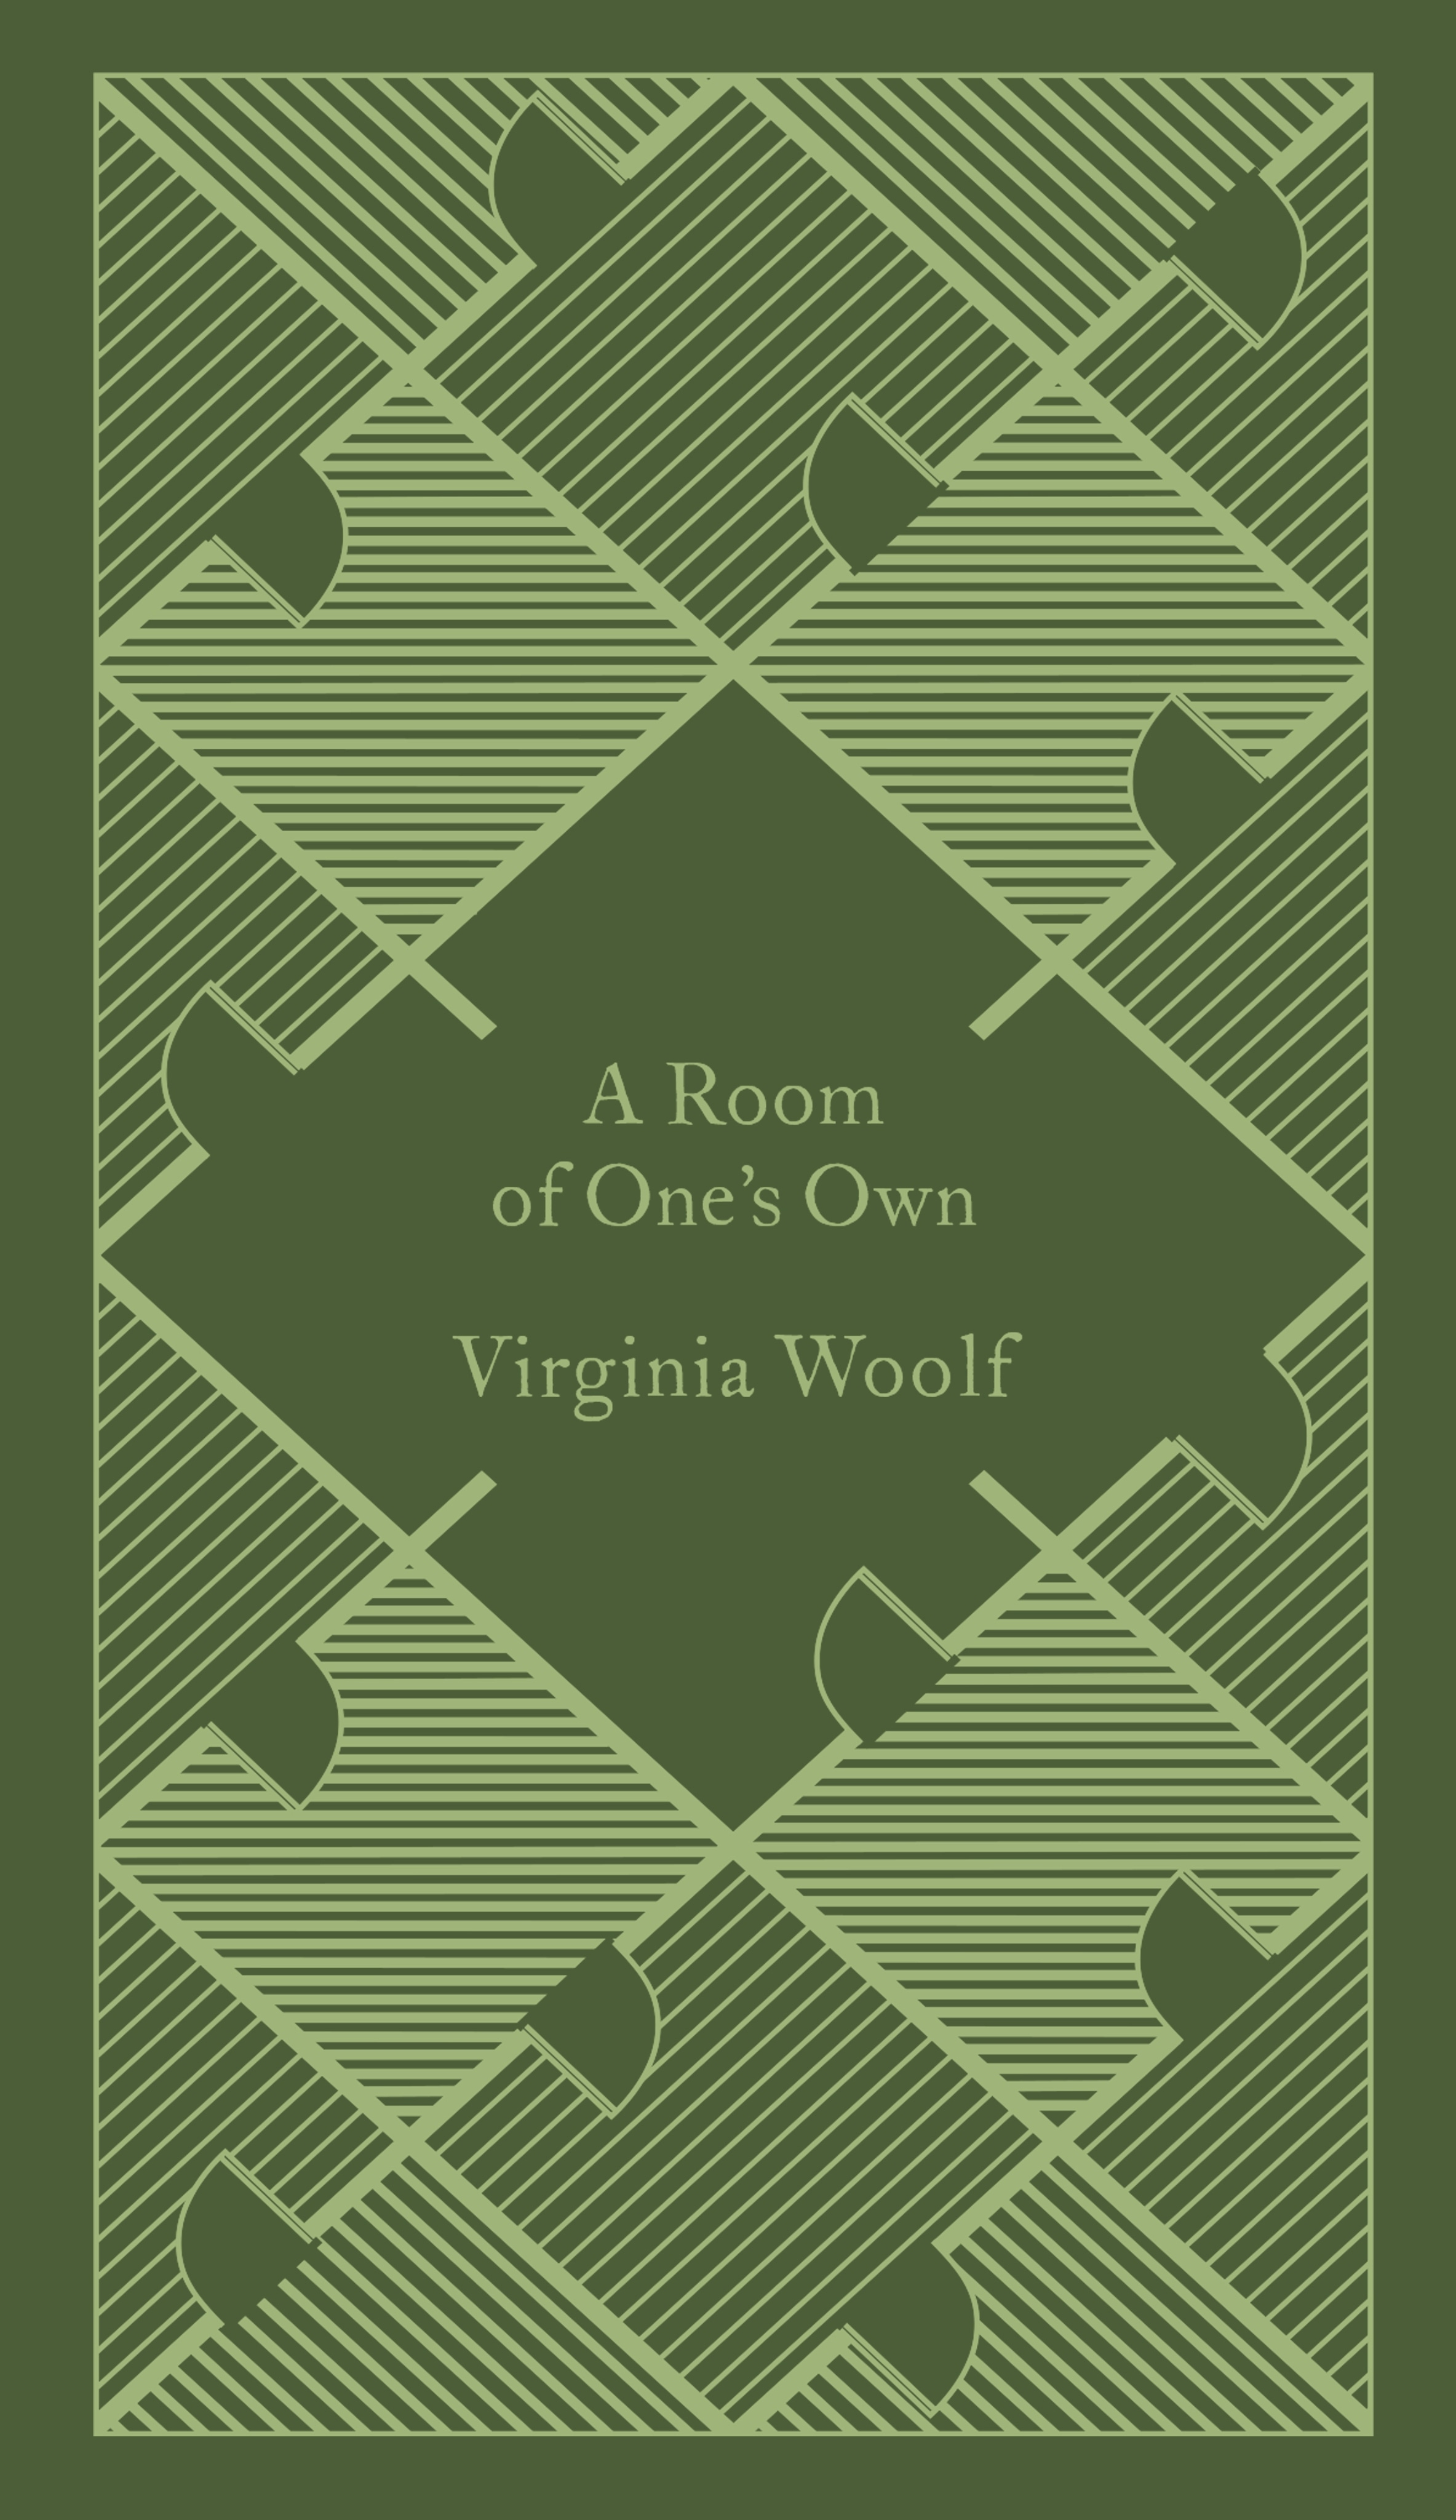 Book “A Room of One's Own” by Virginia Woolf — November 6, 2014